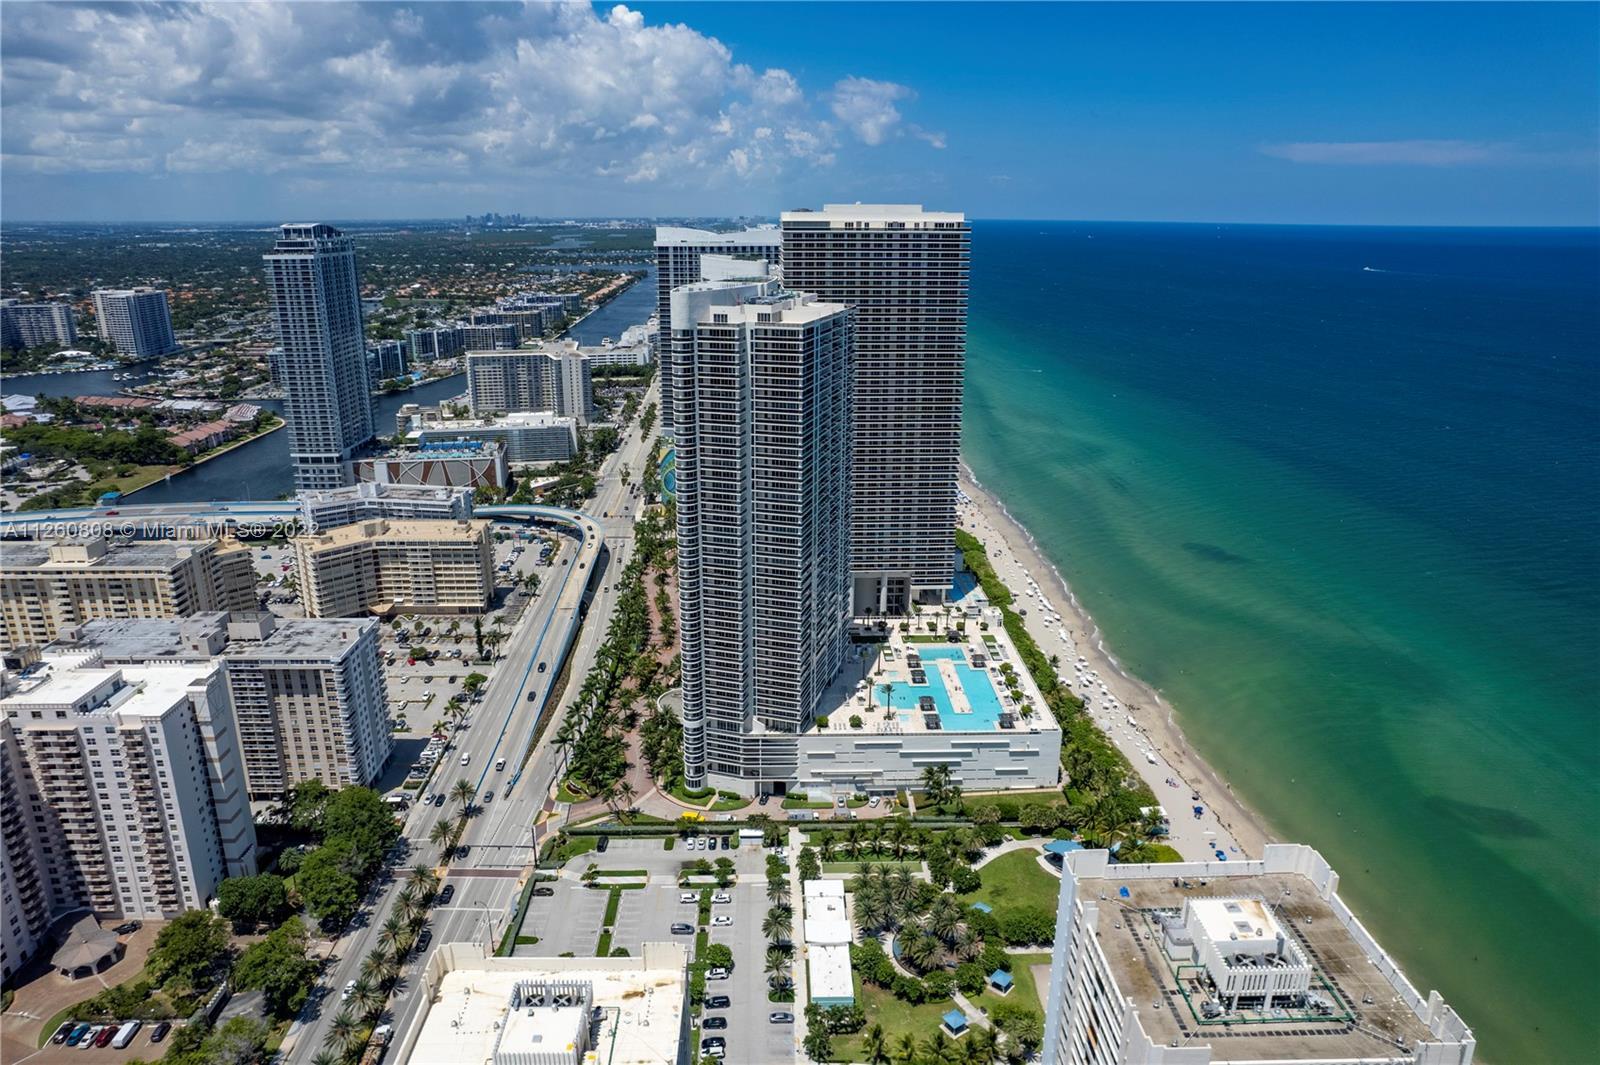 Breathtaking 3 bedroom/3 bath Ocean View Residence in the one and only Beach Club in Hallandale Beac